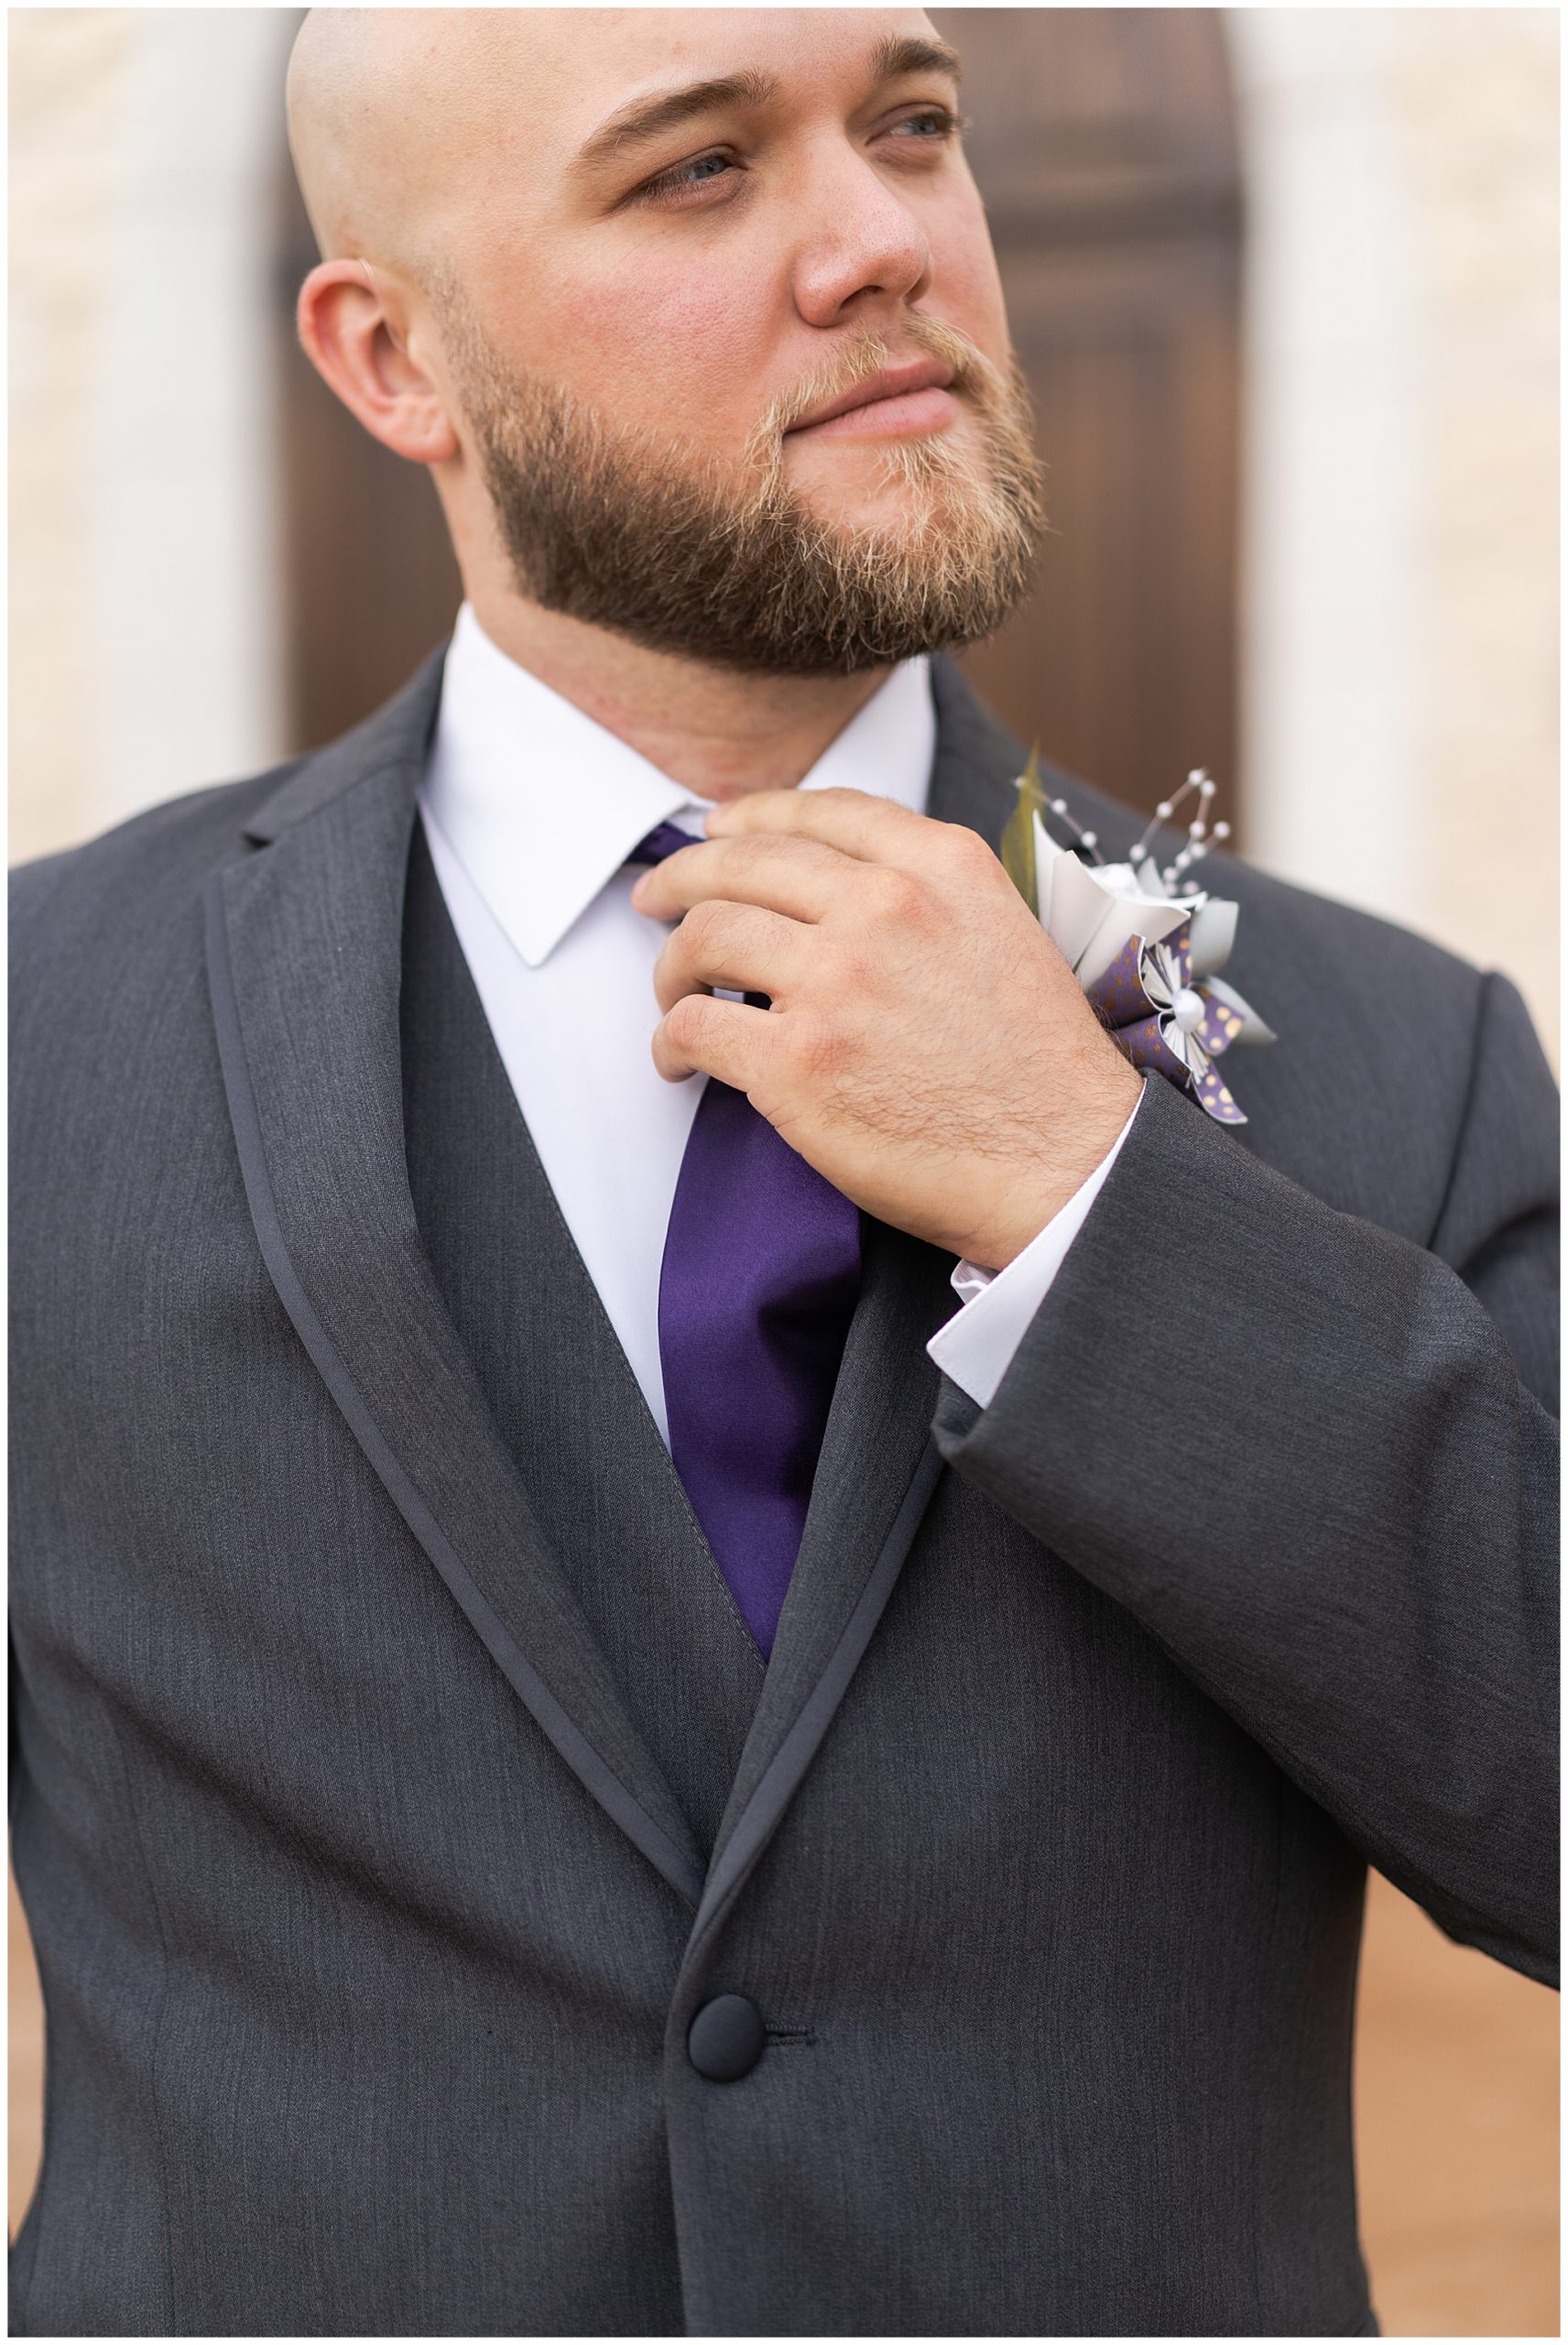 groom adjusts his tie on his wedding day at Ashton Gardens in Houston Texas by Swish and Click Photography